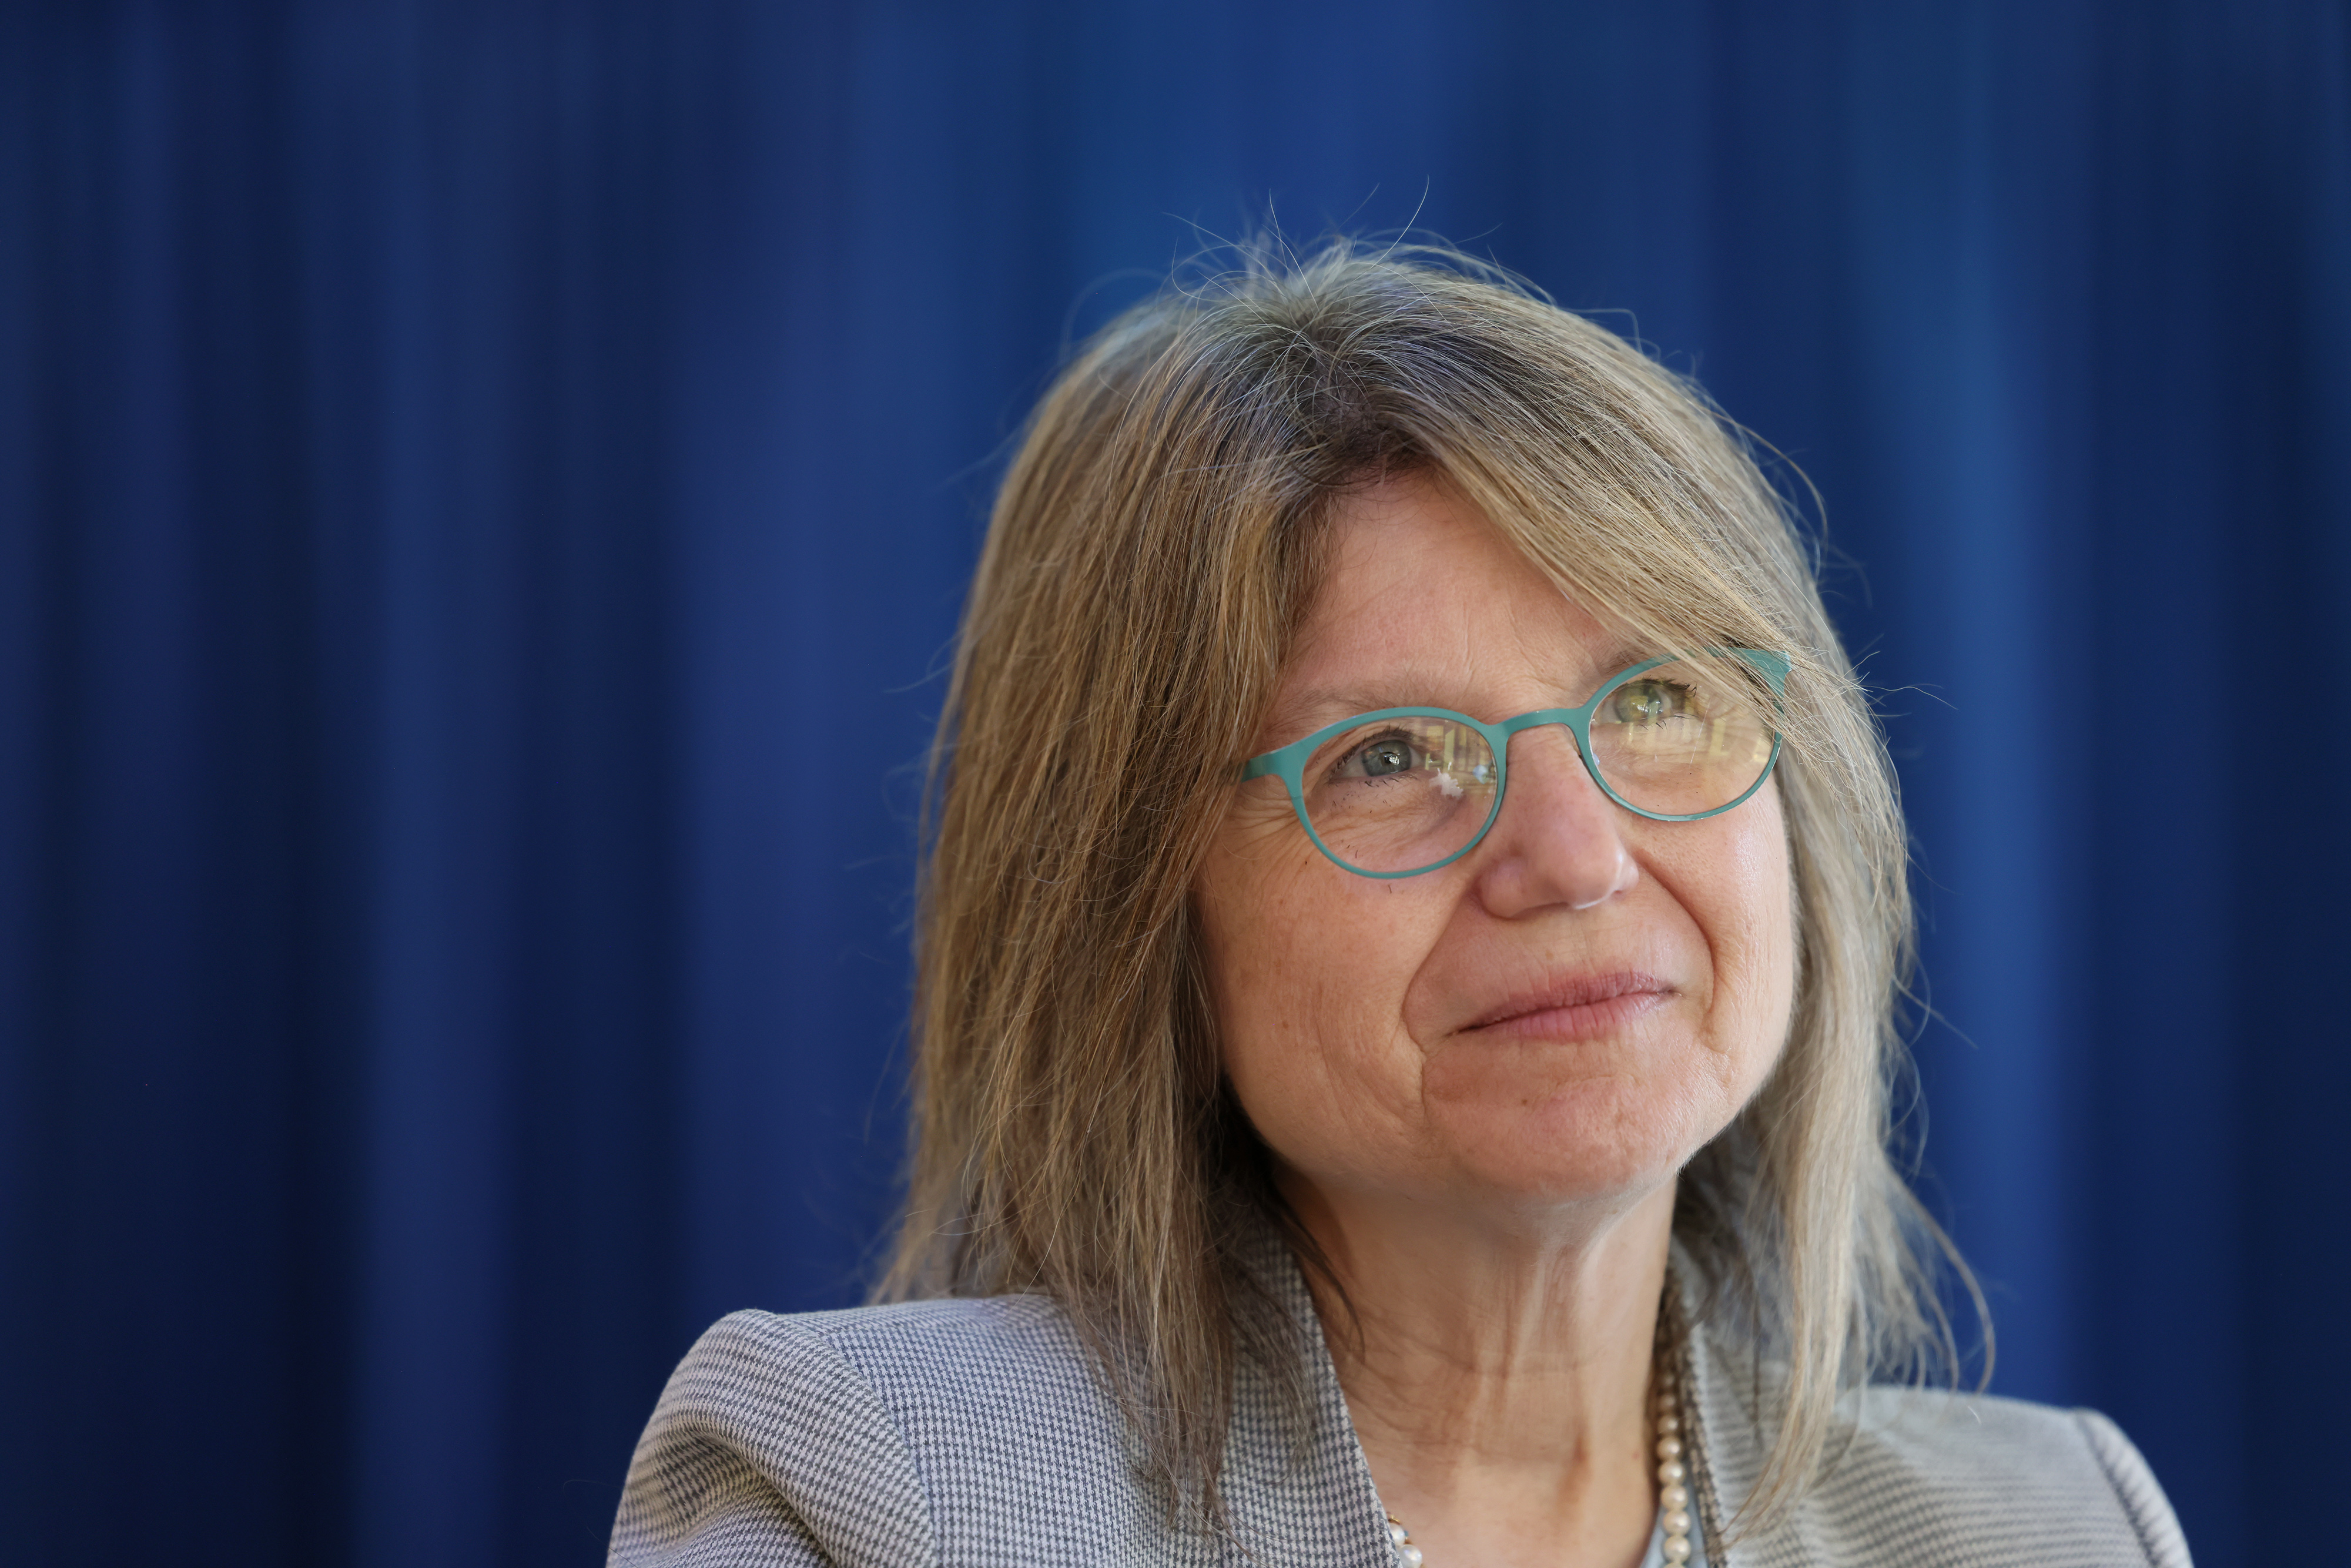 Incoming MIT president Sally Kornbluth wants to lift other women up with her Being a role model is important